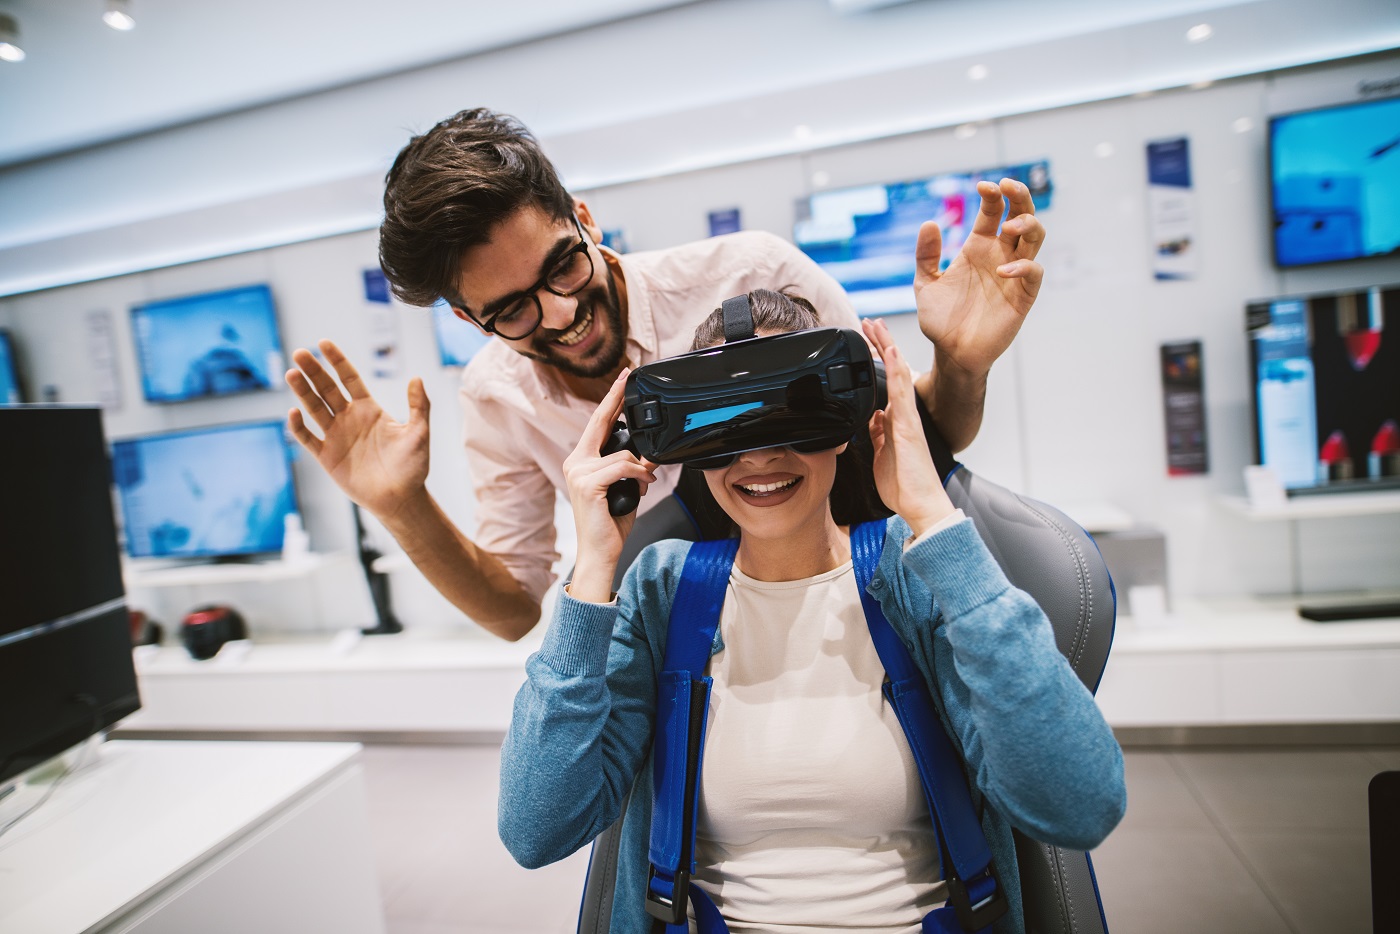 How Can Brands Benefit from Virtual Reality Technology?